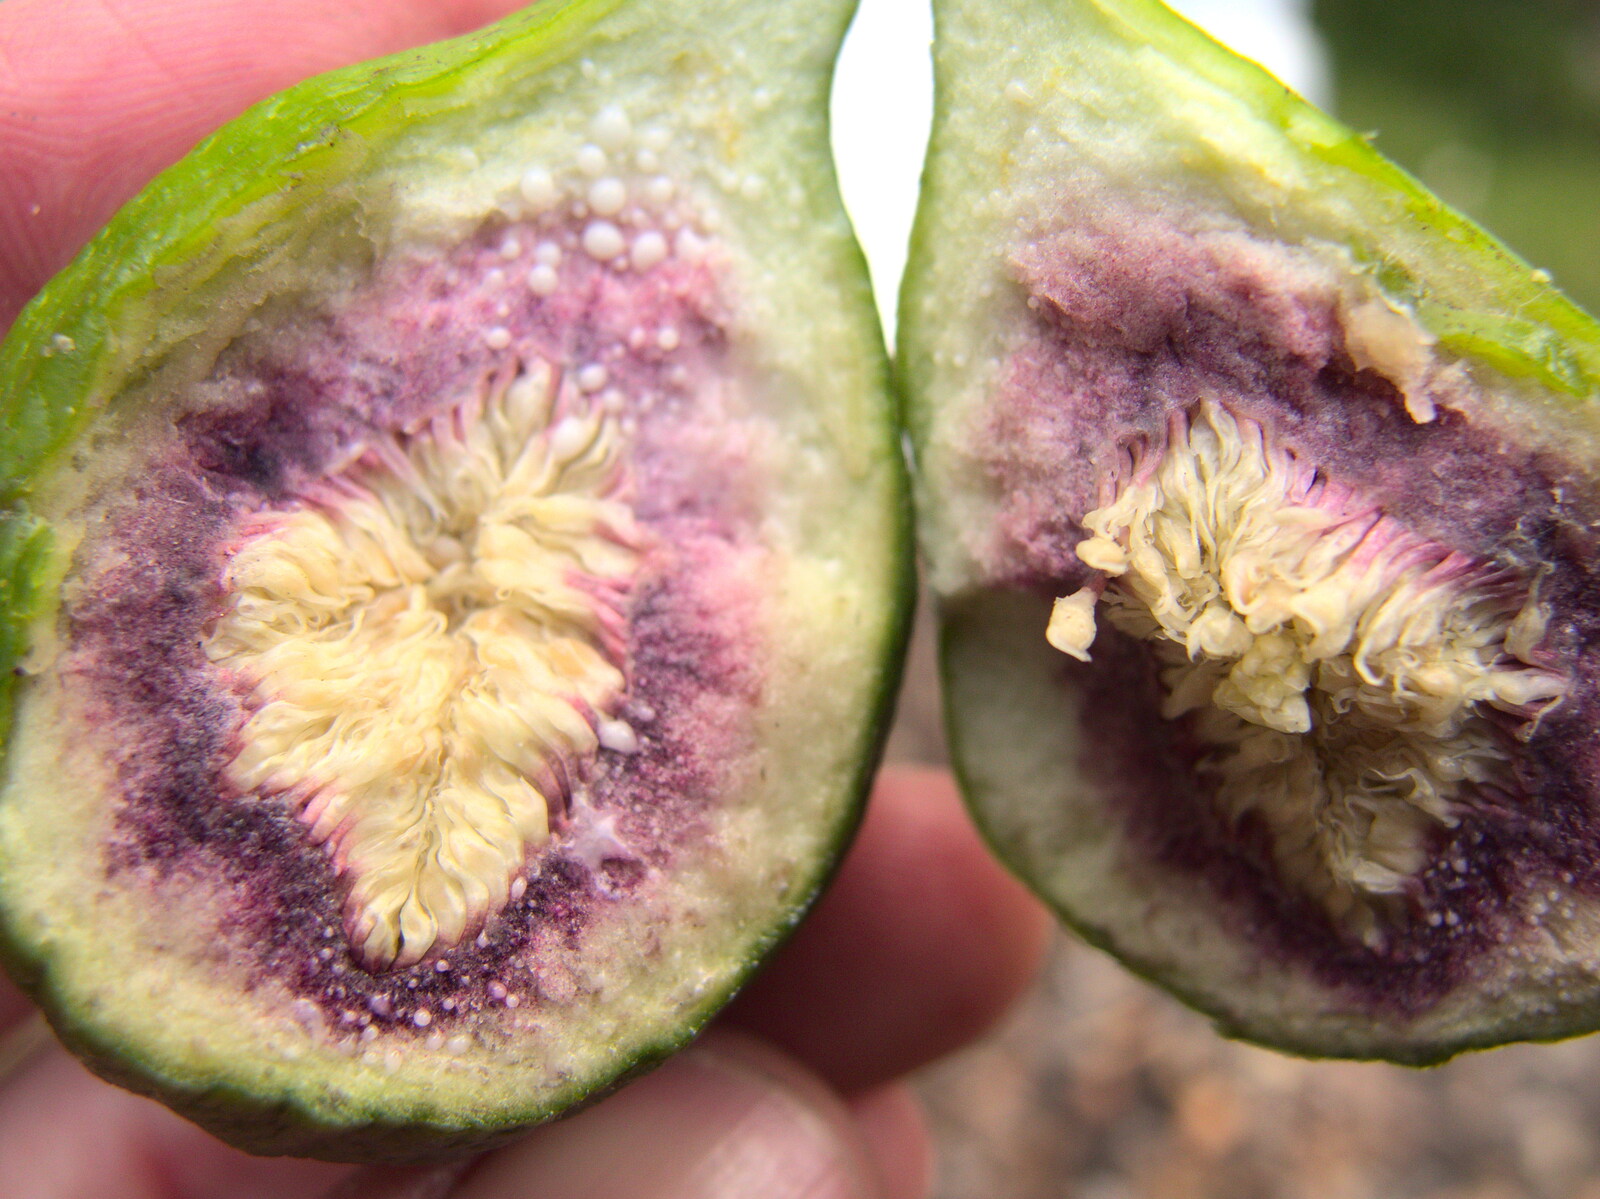 Camping in West Runton, North Norfolk - 30th July 2016: The insides of an unripe fig